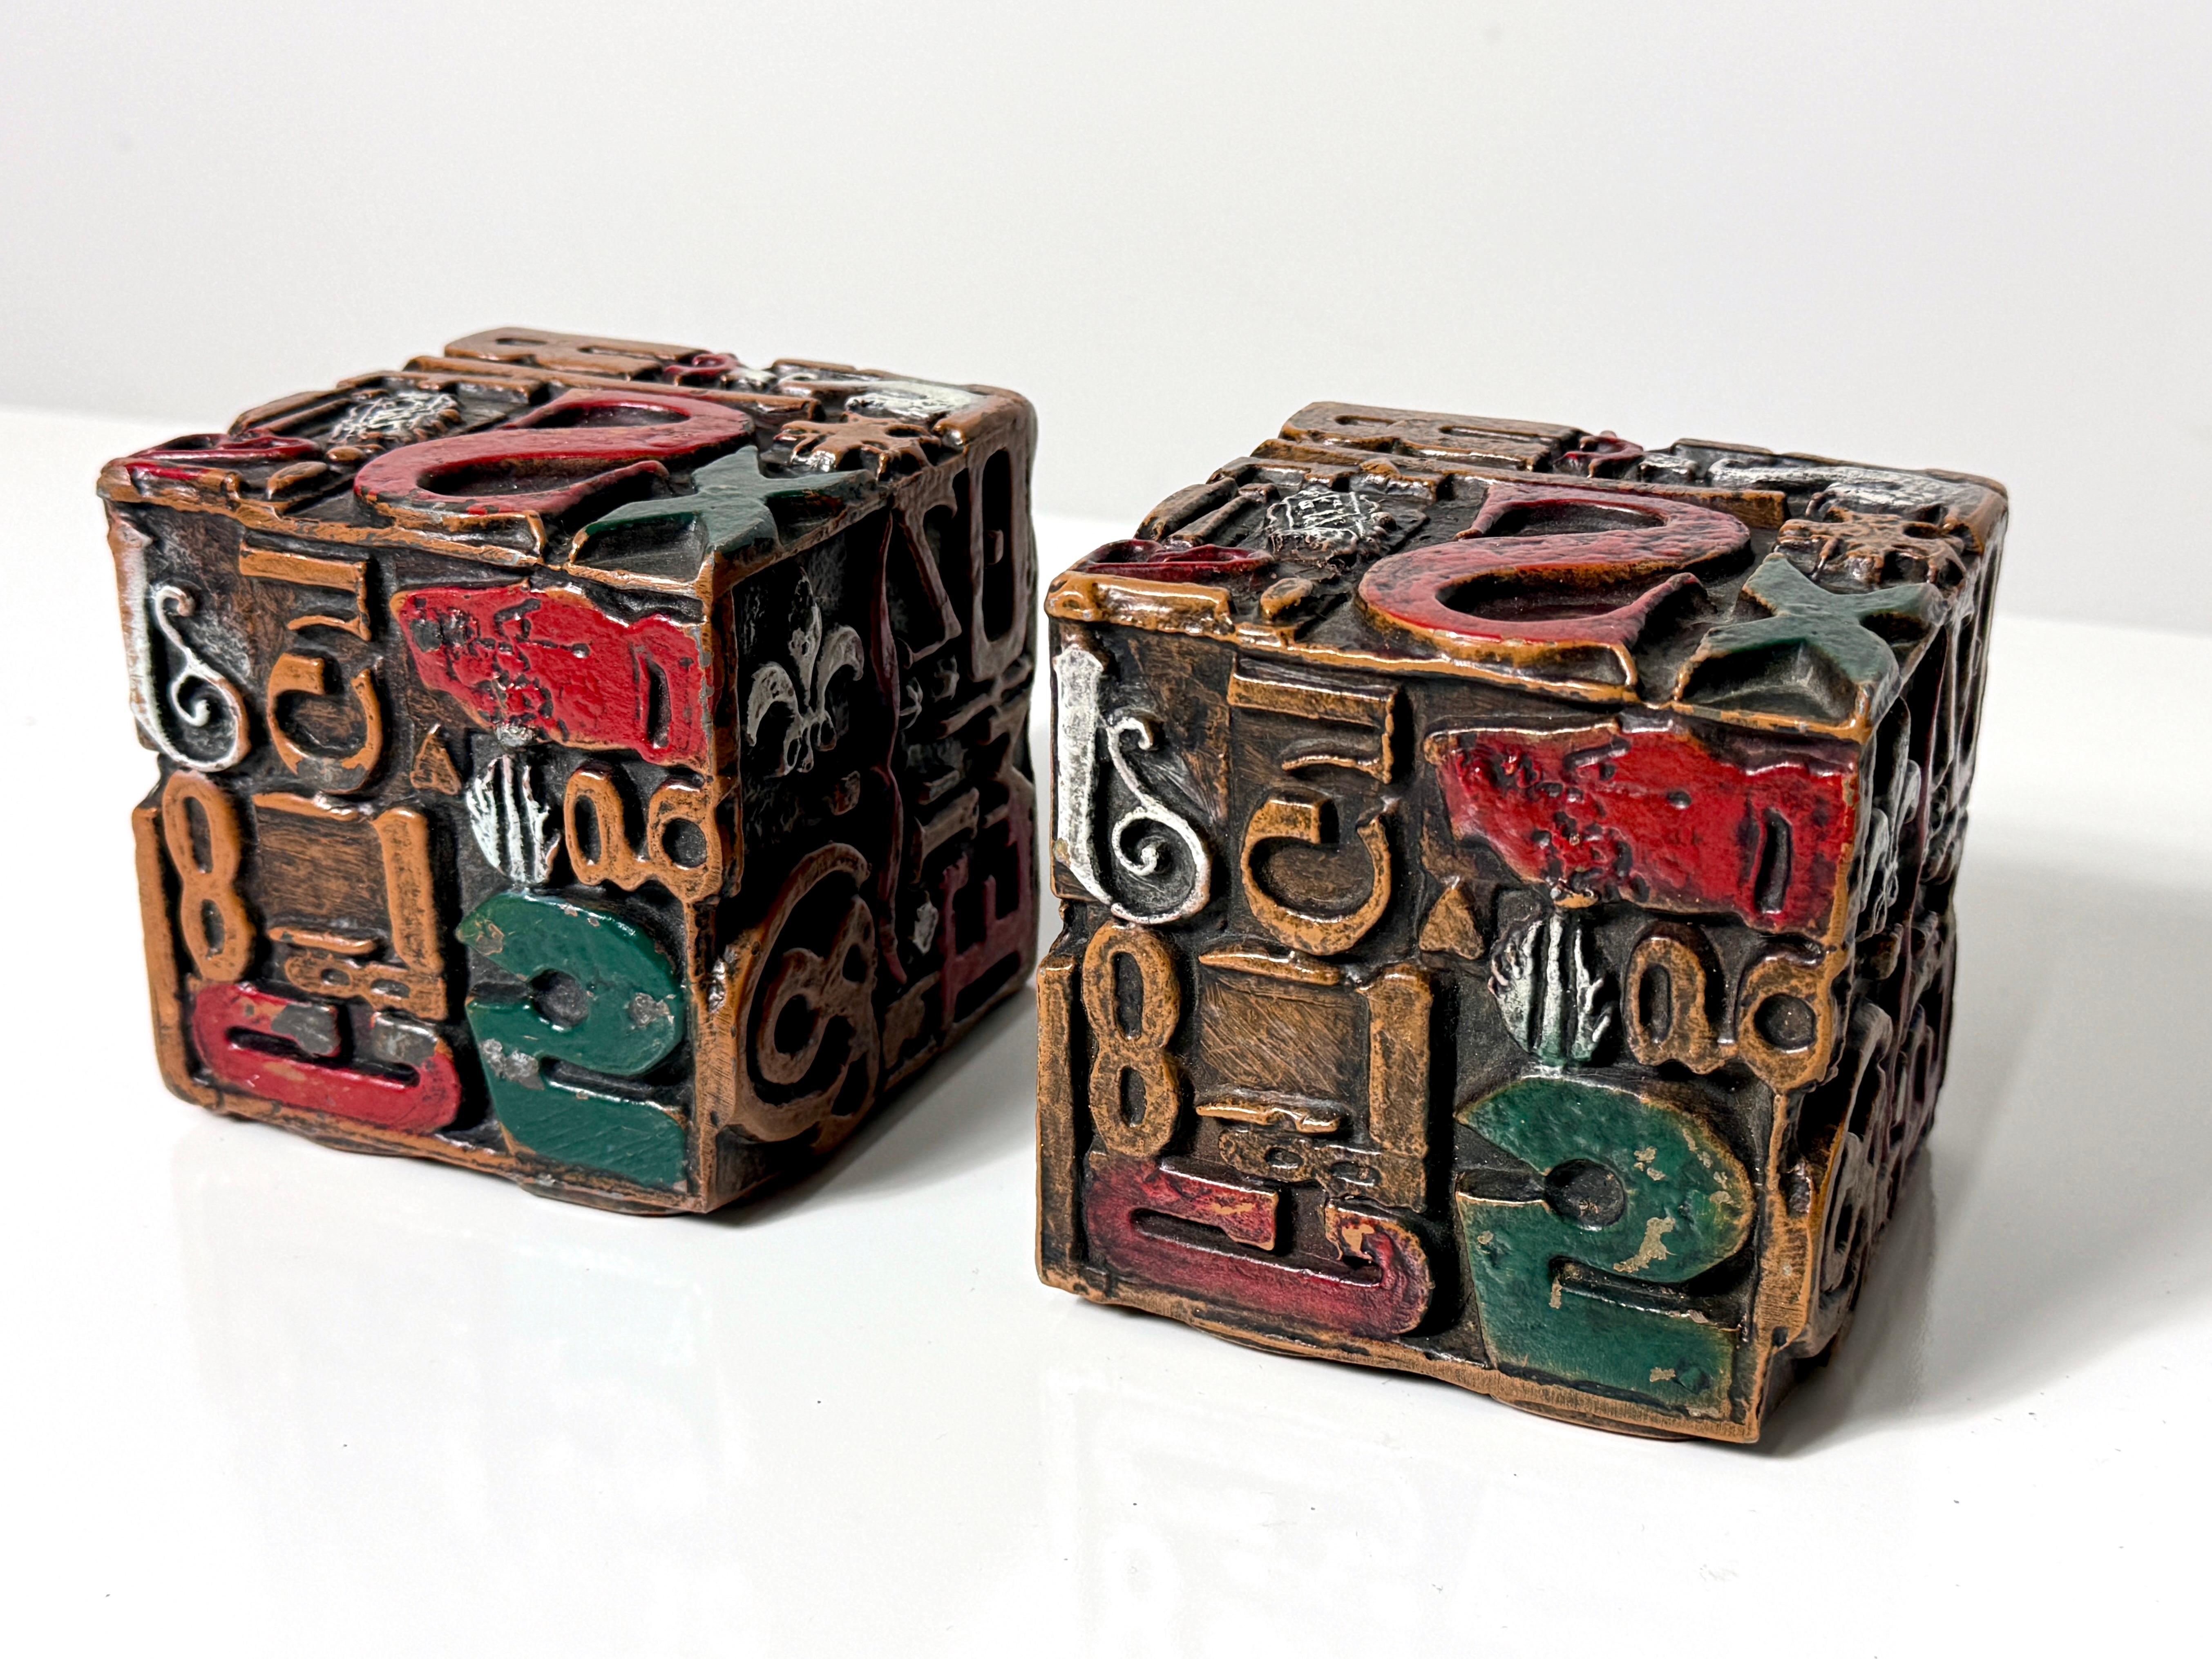 Pair of Mid Century Modern typographic cube sculptures or bookends designed by Sheldon Rose circa 1960s  

Titled 